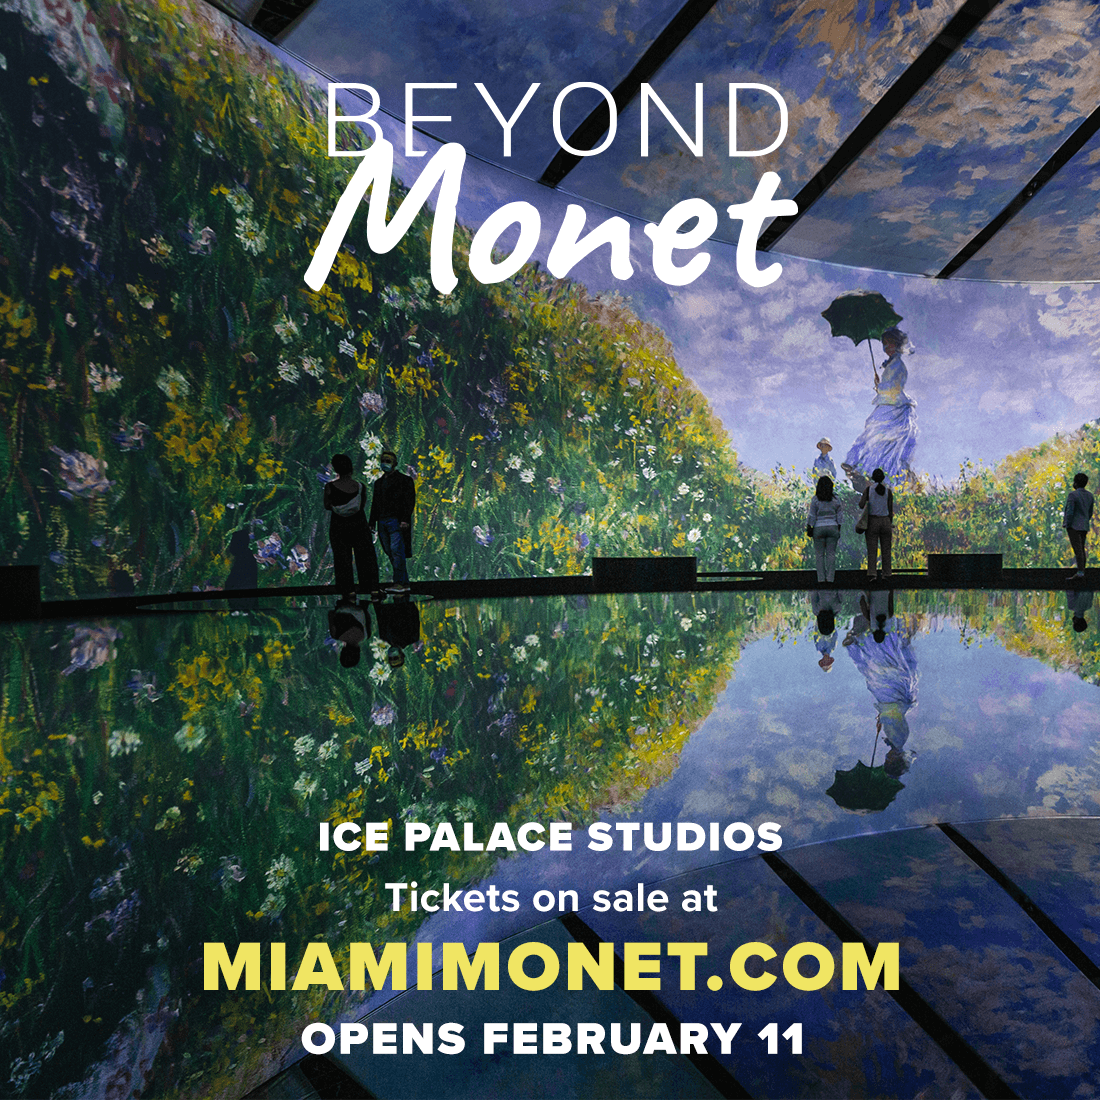 Britto Charette: Beyond Monet: Immersive Art Experience at Miami’s Ice Palace Studios